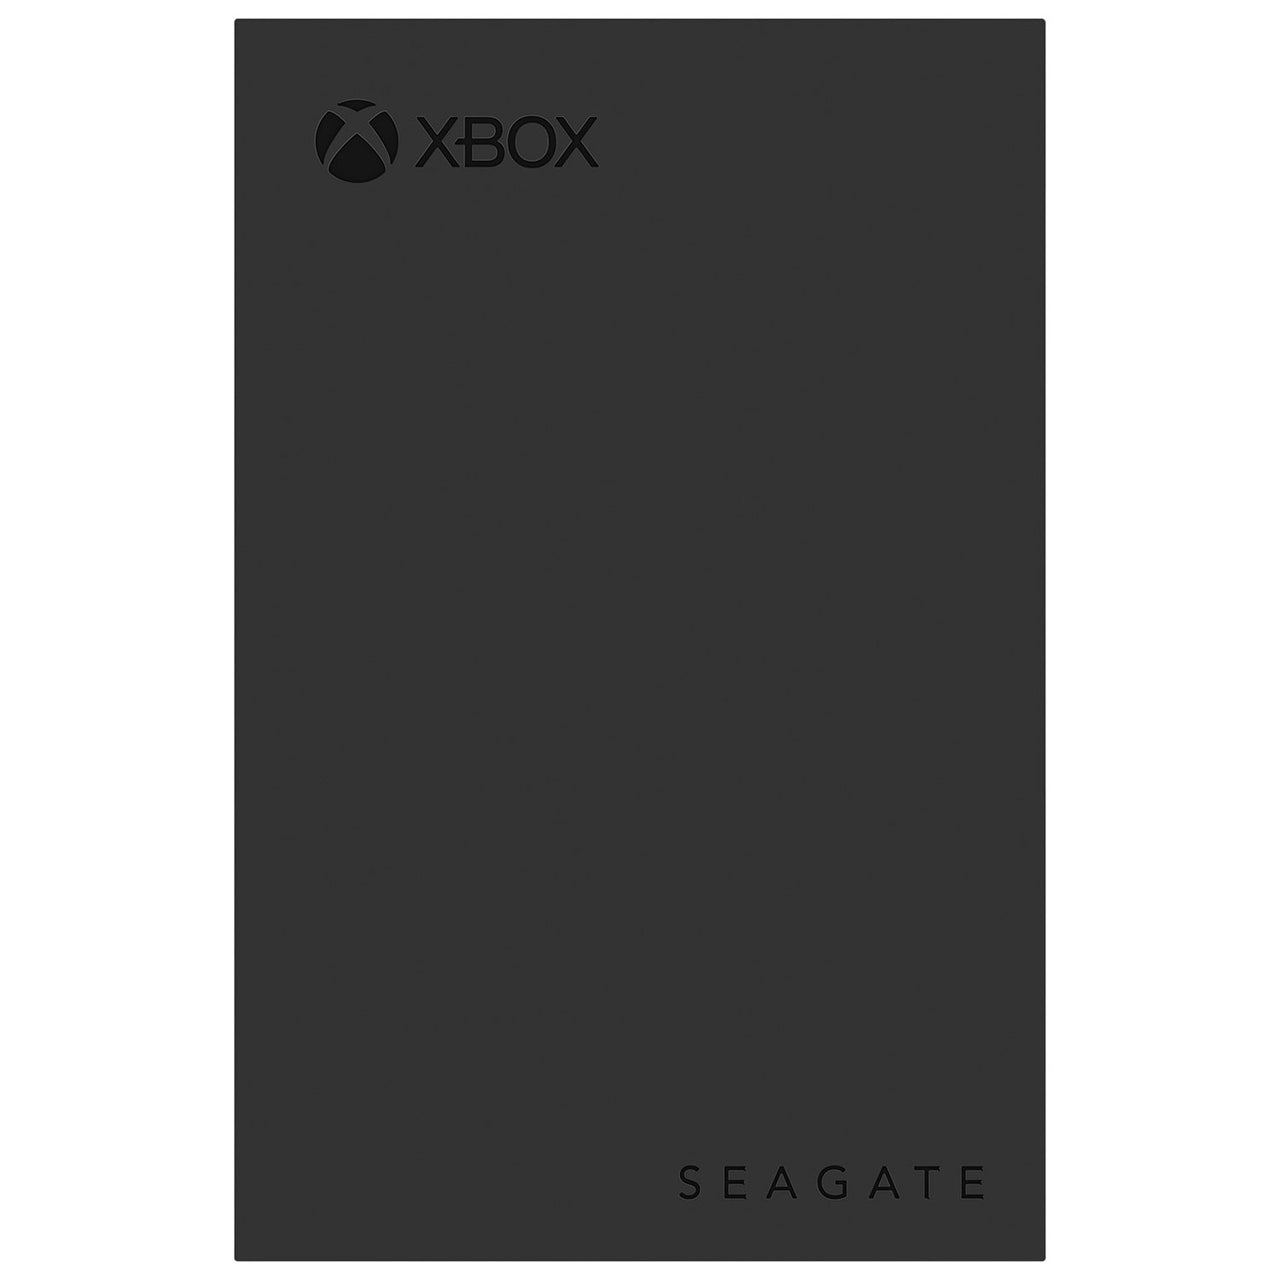 Seagate Xbox Certified 4TB USB 3.0 Portable External Hard Drive with Green LED Bar (STKX4000402)